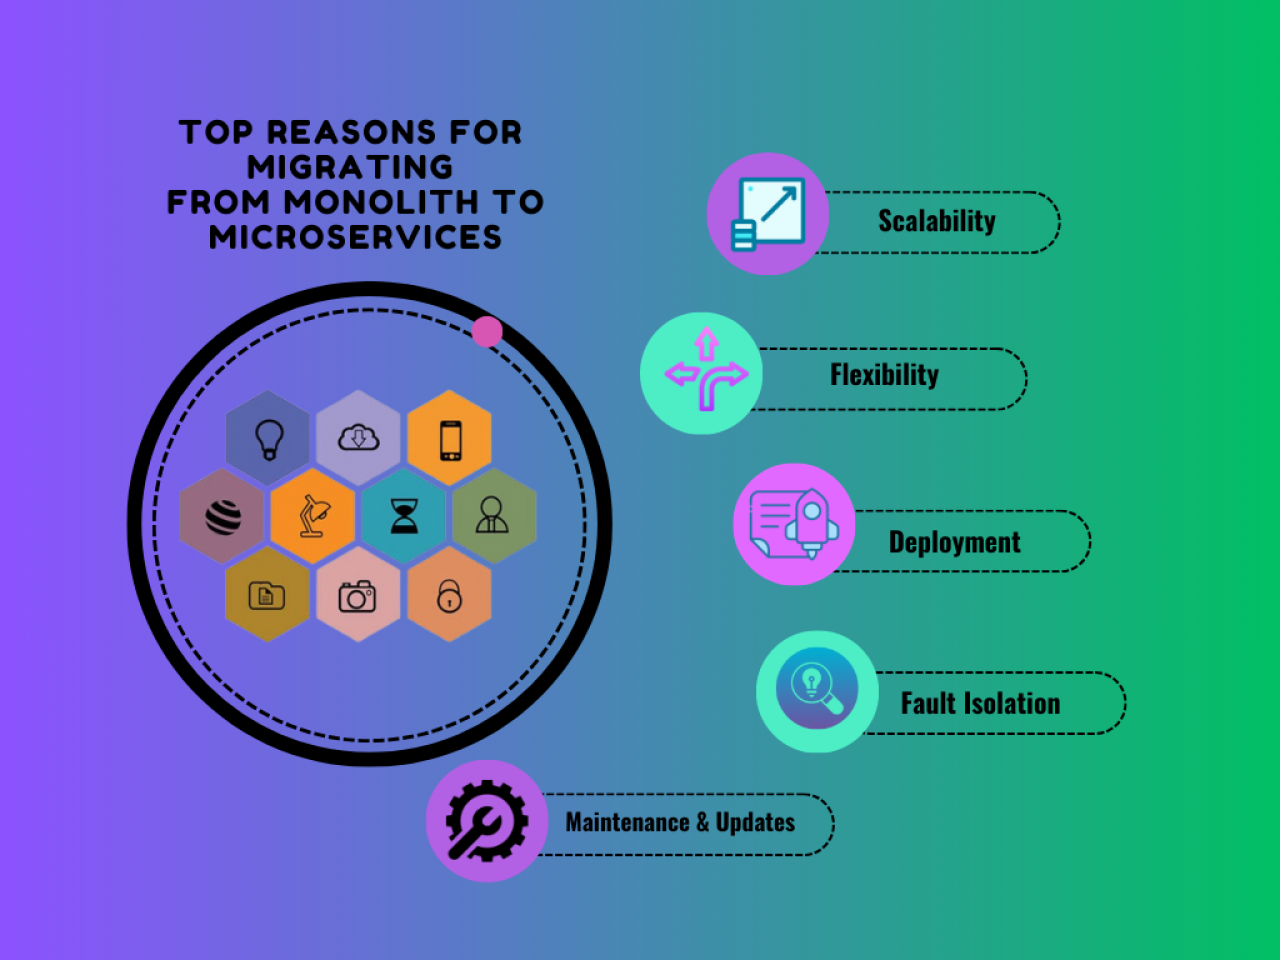 Top Reasons for Migrating from Monolith to Microservices.